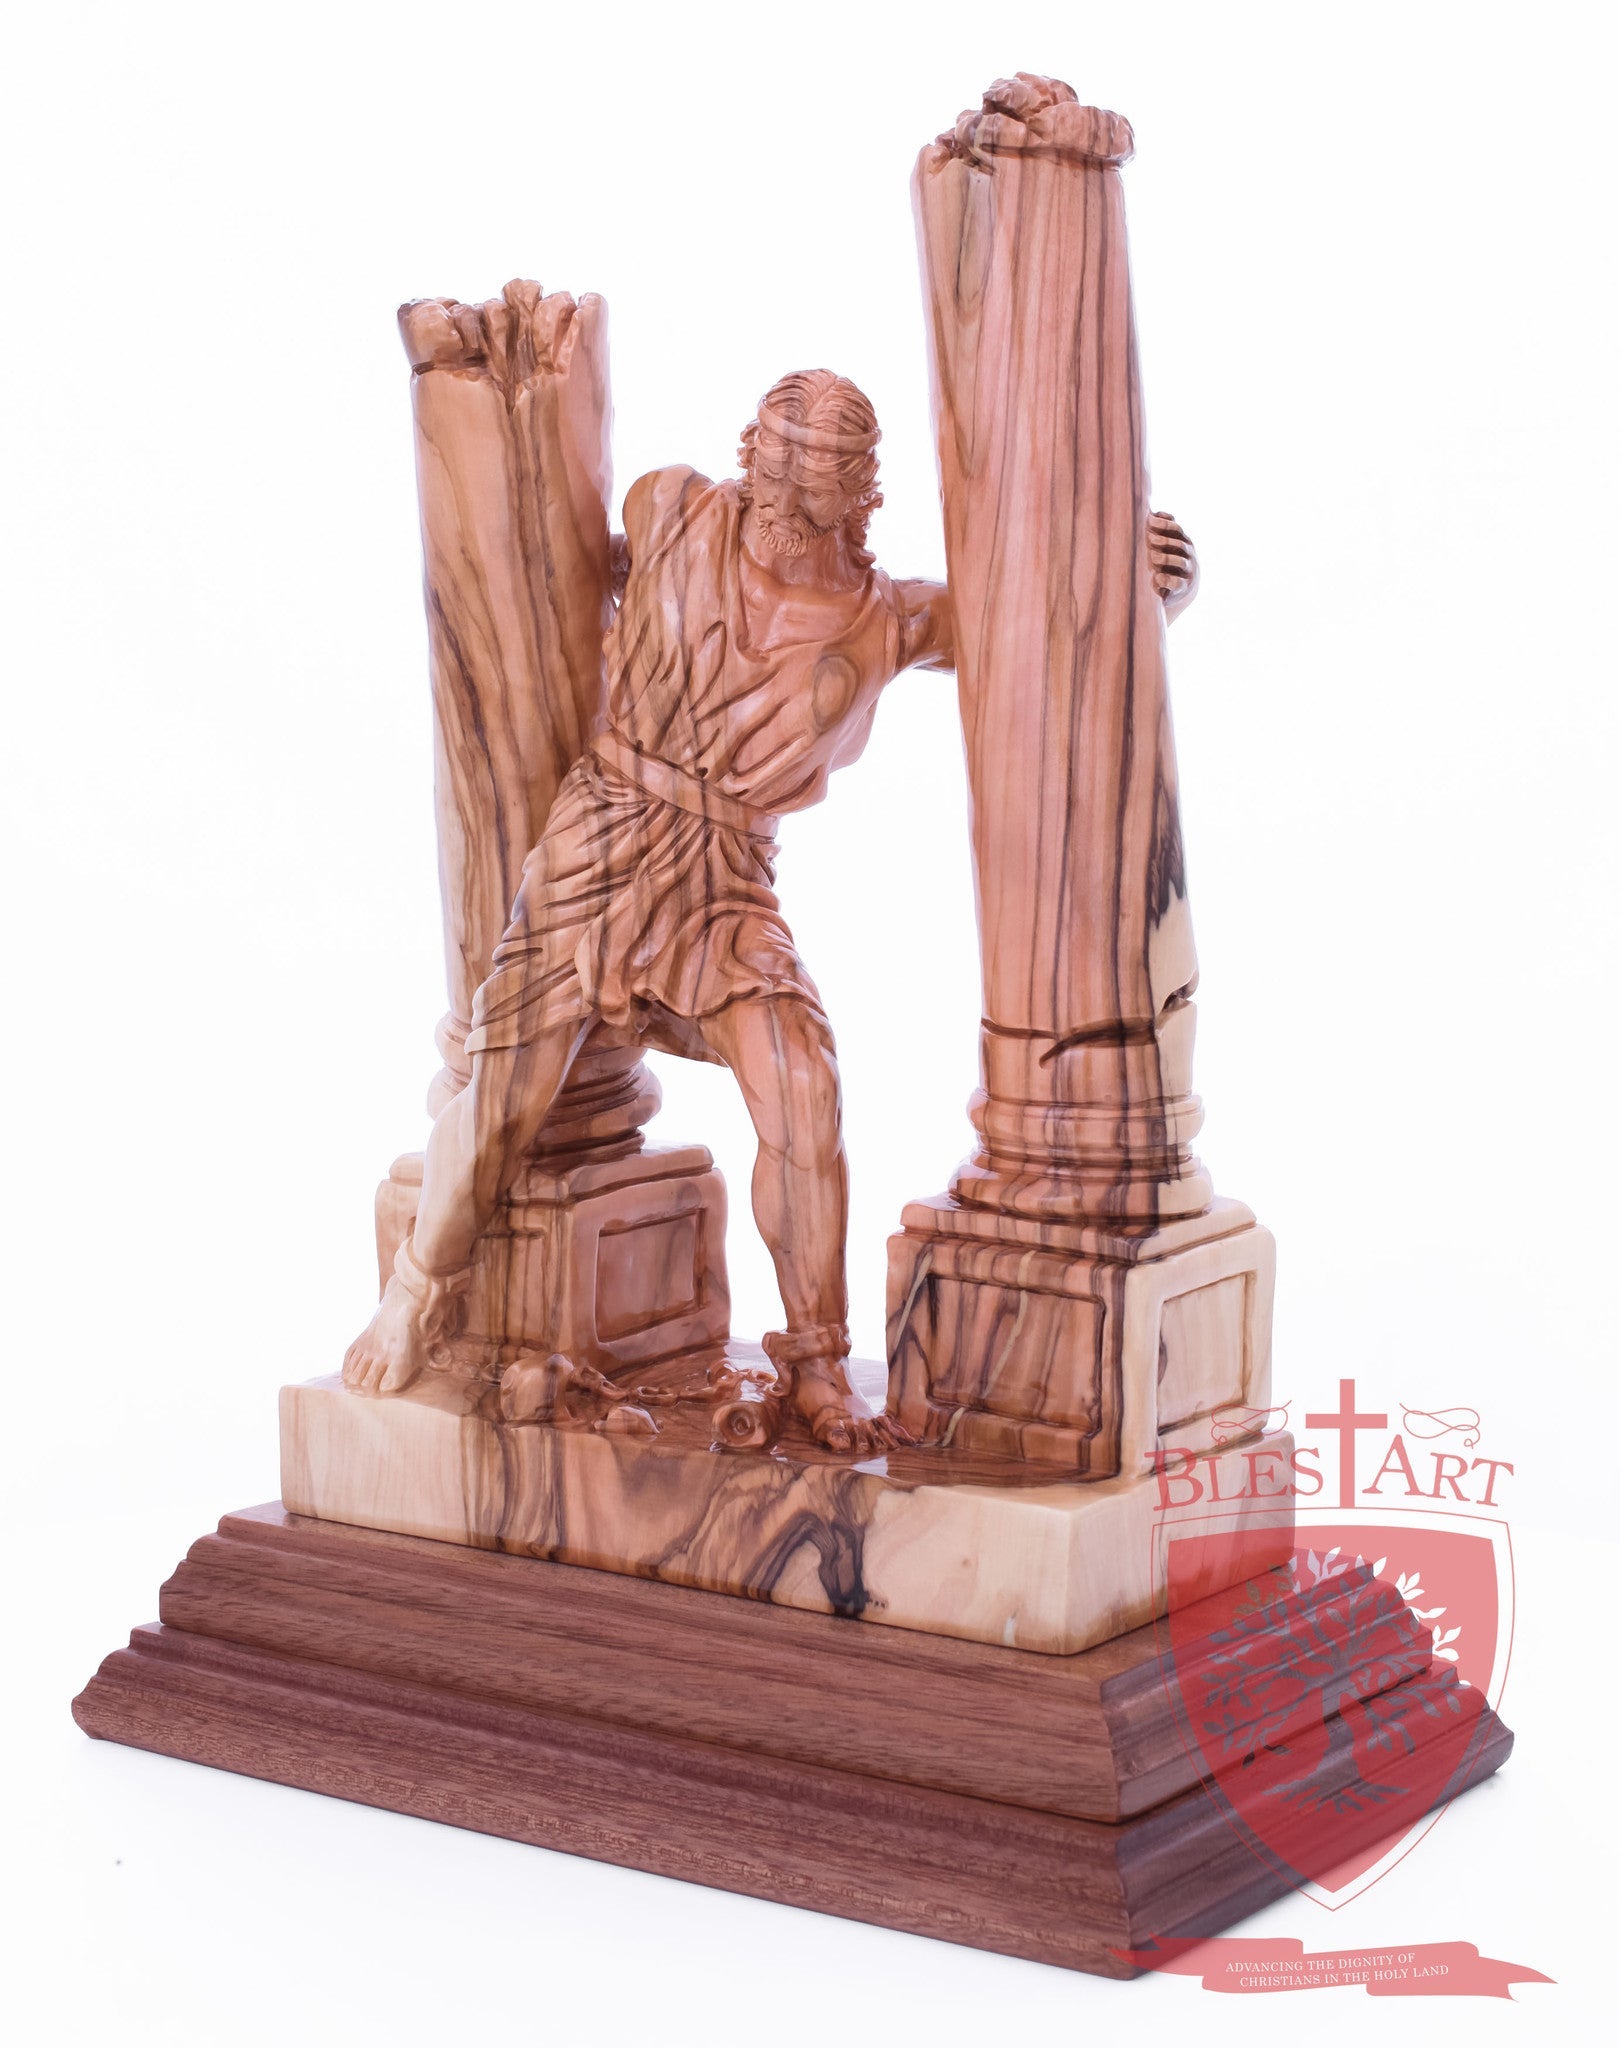 Samson destroying the temple, Size: 8.5" 5" 11.5"